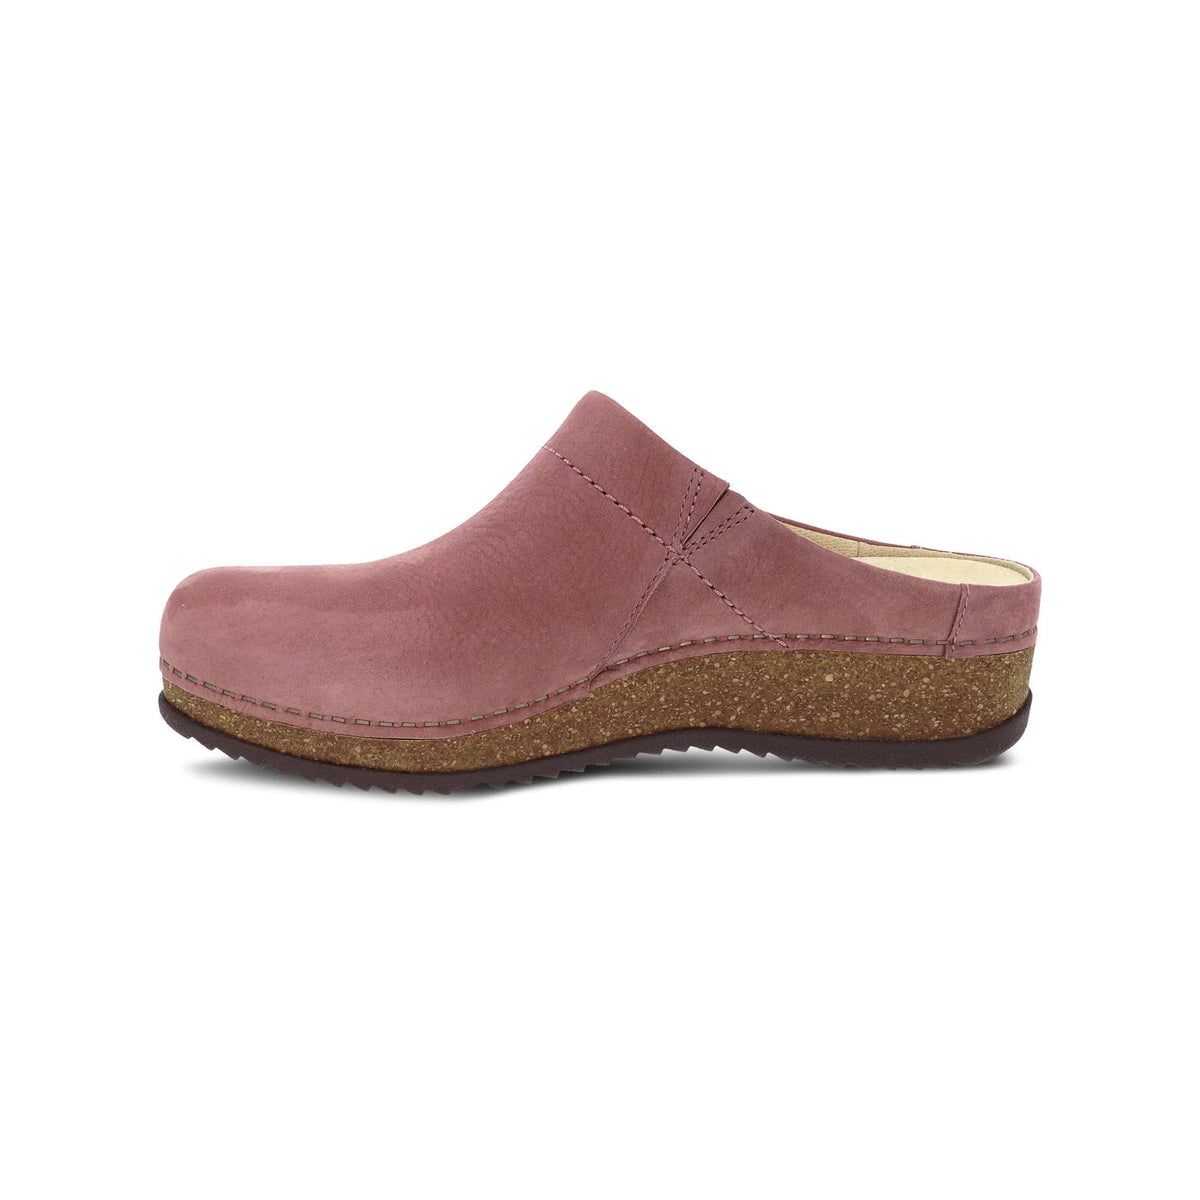 A single Dansko Mariella Rose-colored open back clog shoe with a cork sole, isolated on a white background.